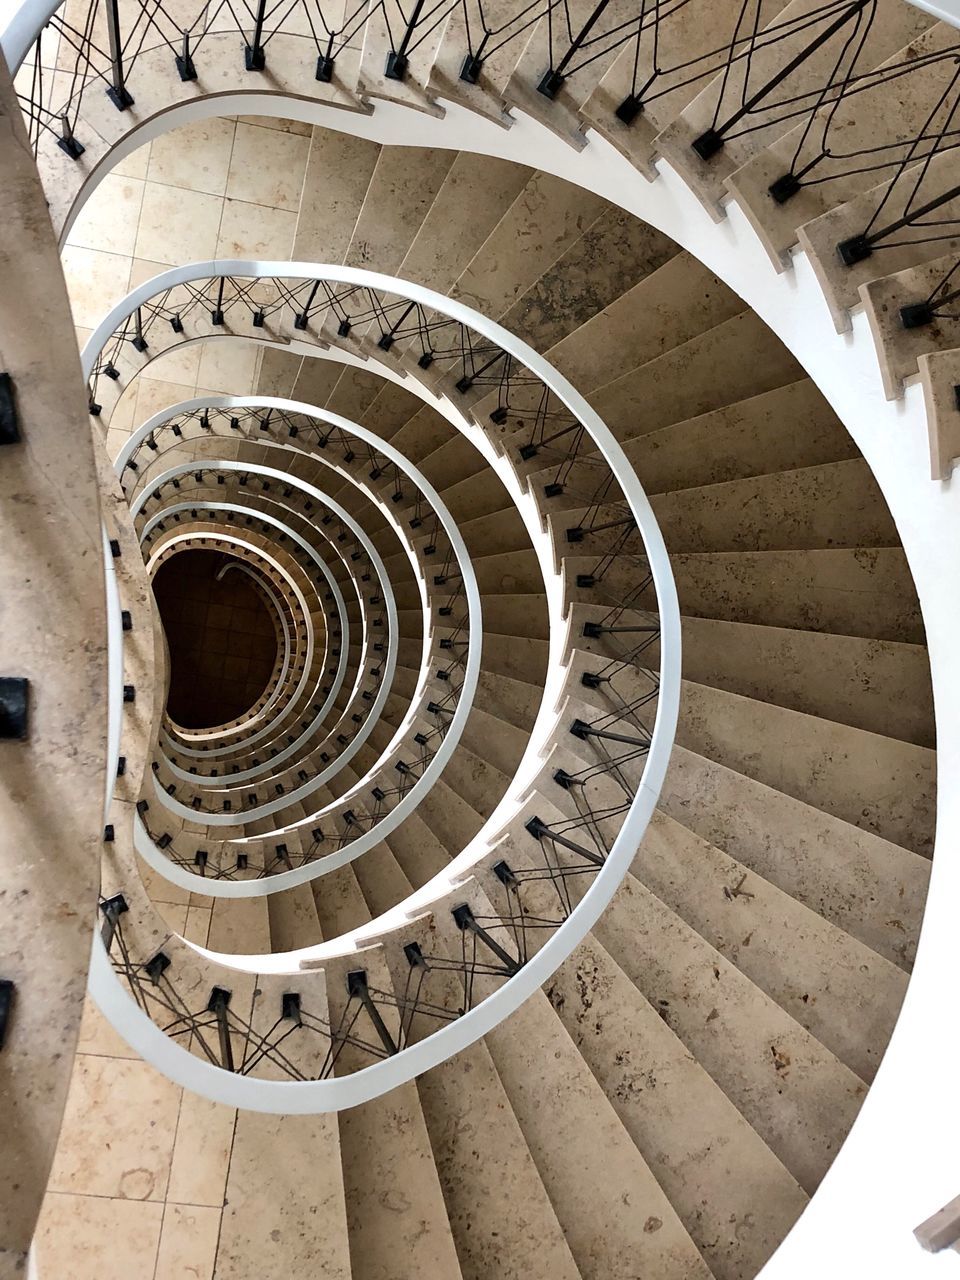 steps and staircases, spiral, staircase, architecture, built structure, spiral staircase, pattern, railing, design, diminishing perspective, no people, indoors, shape, high angle view, directly above, geometric shape, circle, day, architectural feature, absence, directly below, ceiling, concentric